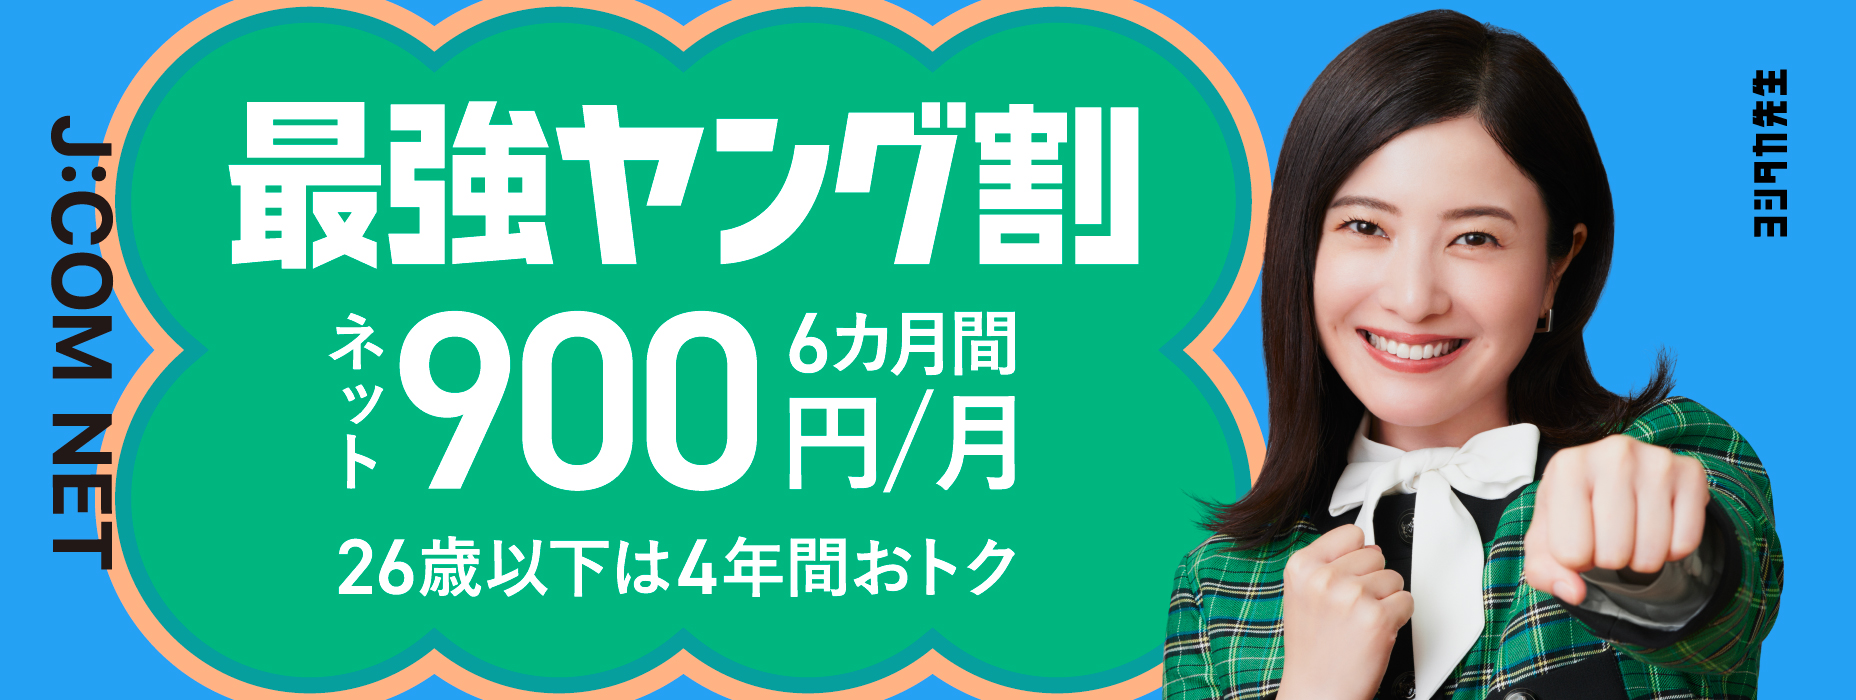 Saikyo Young Wari Net 900 yen/month for 6 months, 4 years discount for those under 26 years old